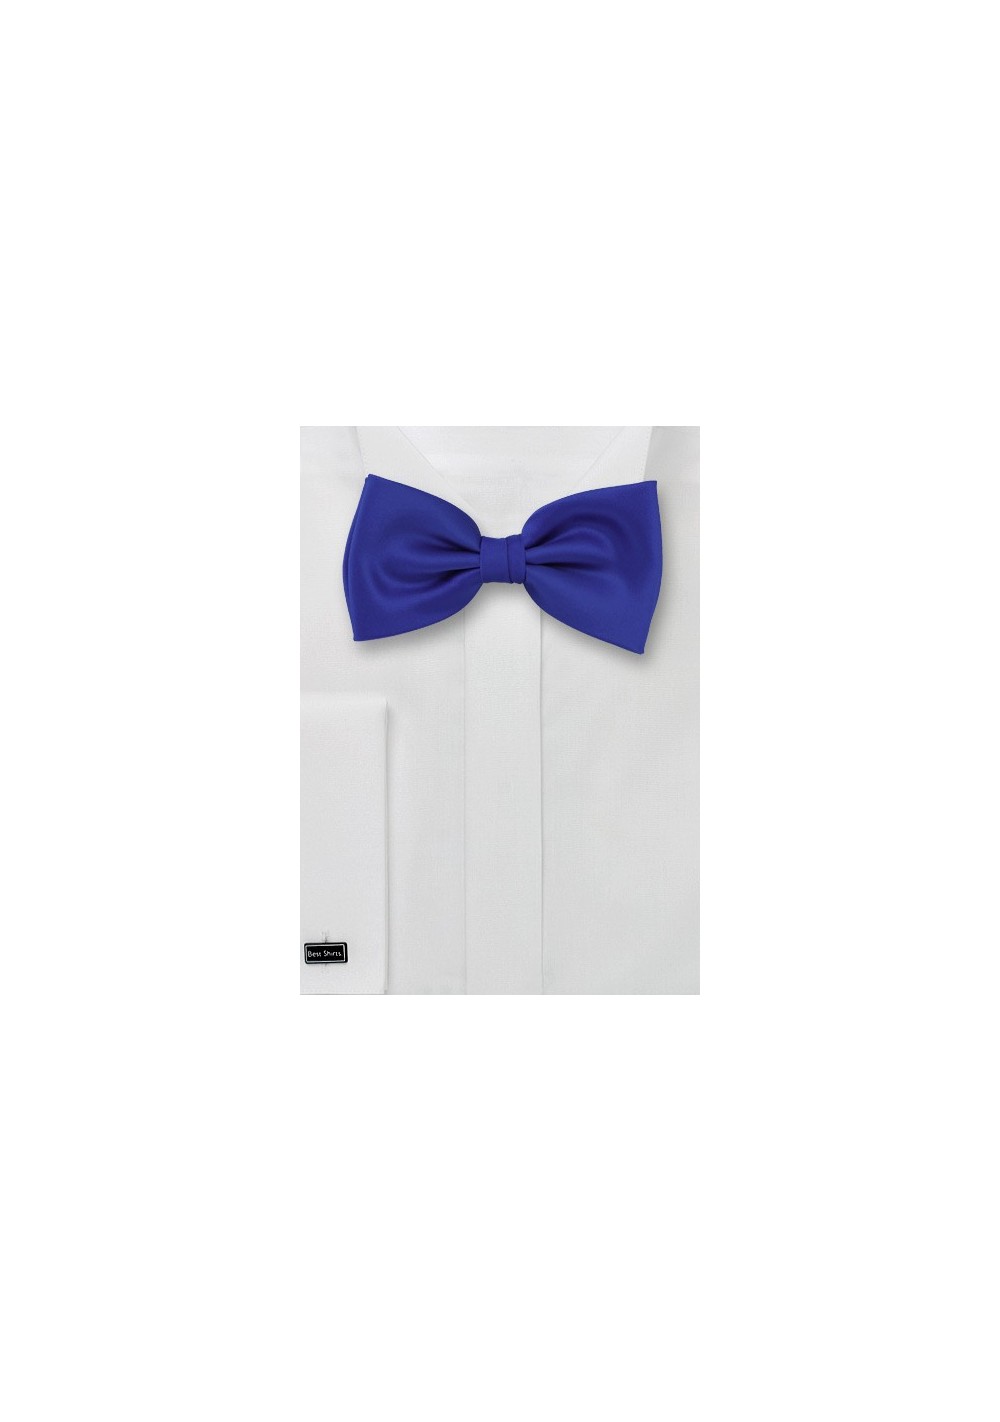 Bow ties -  Solid color bow tie in Royal blue color